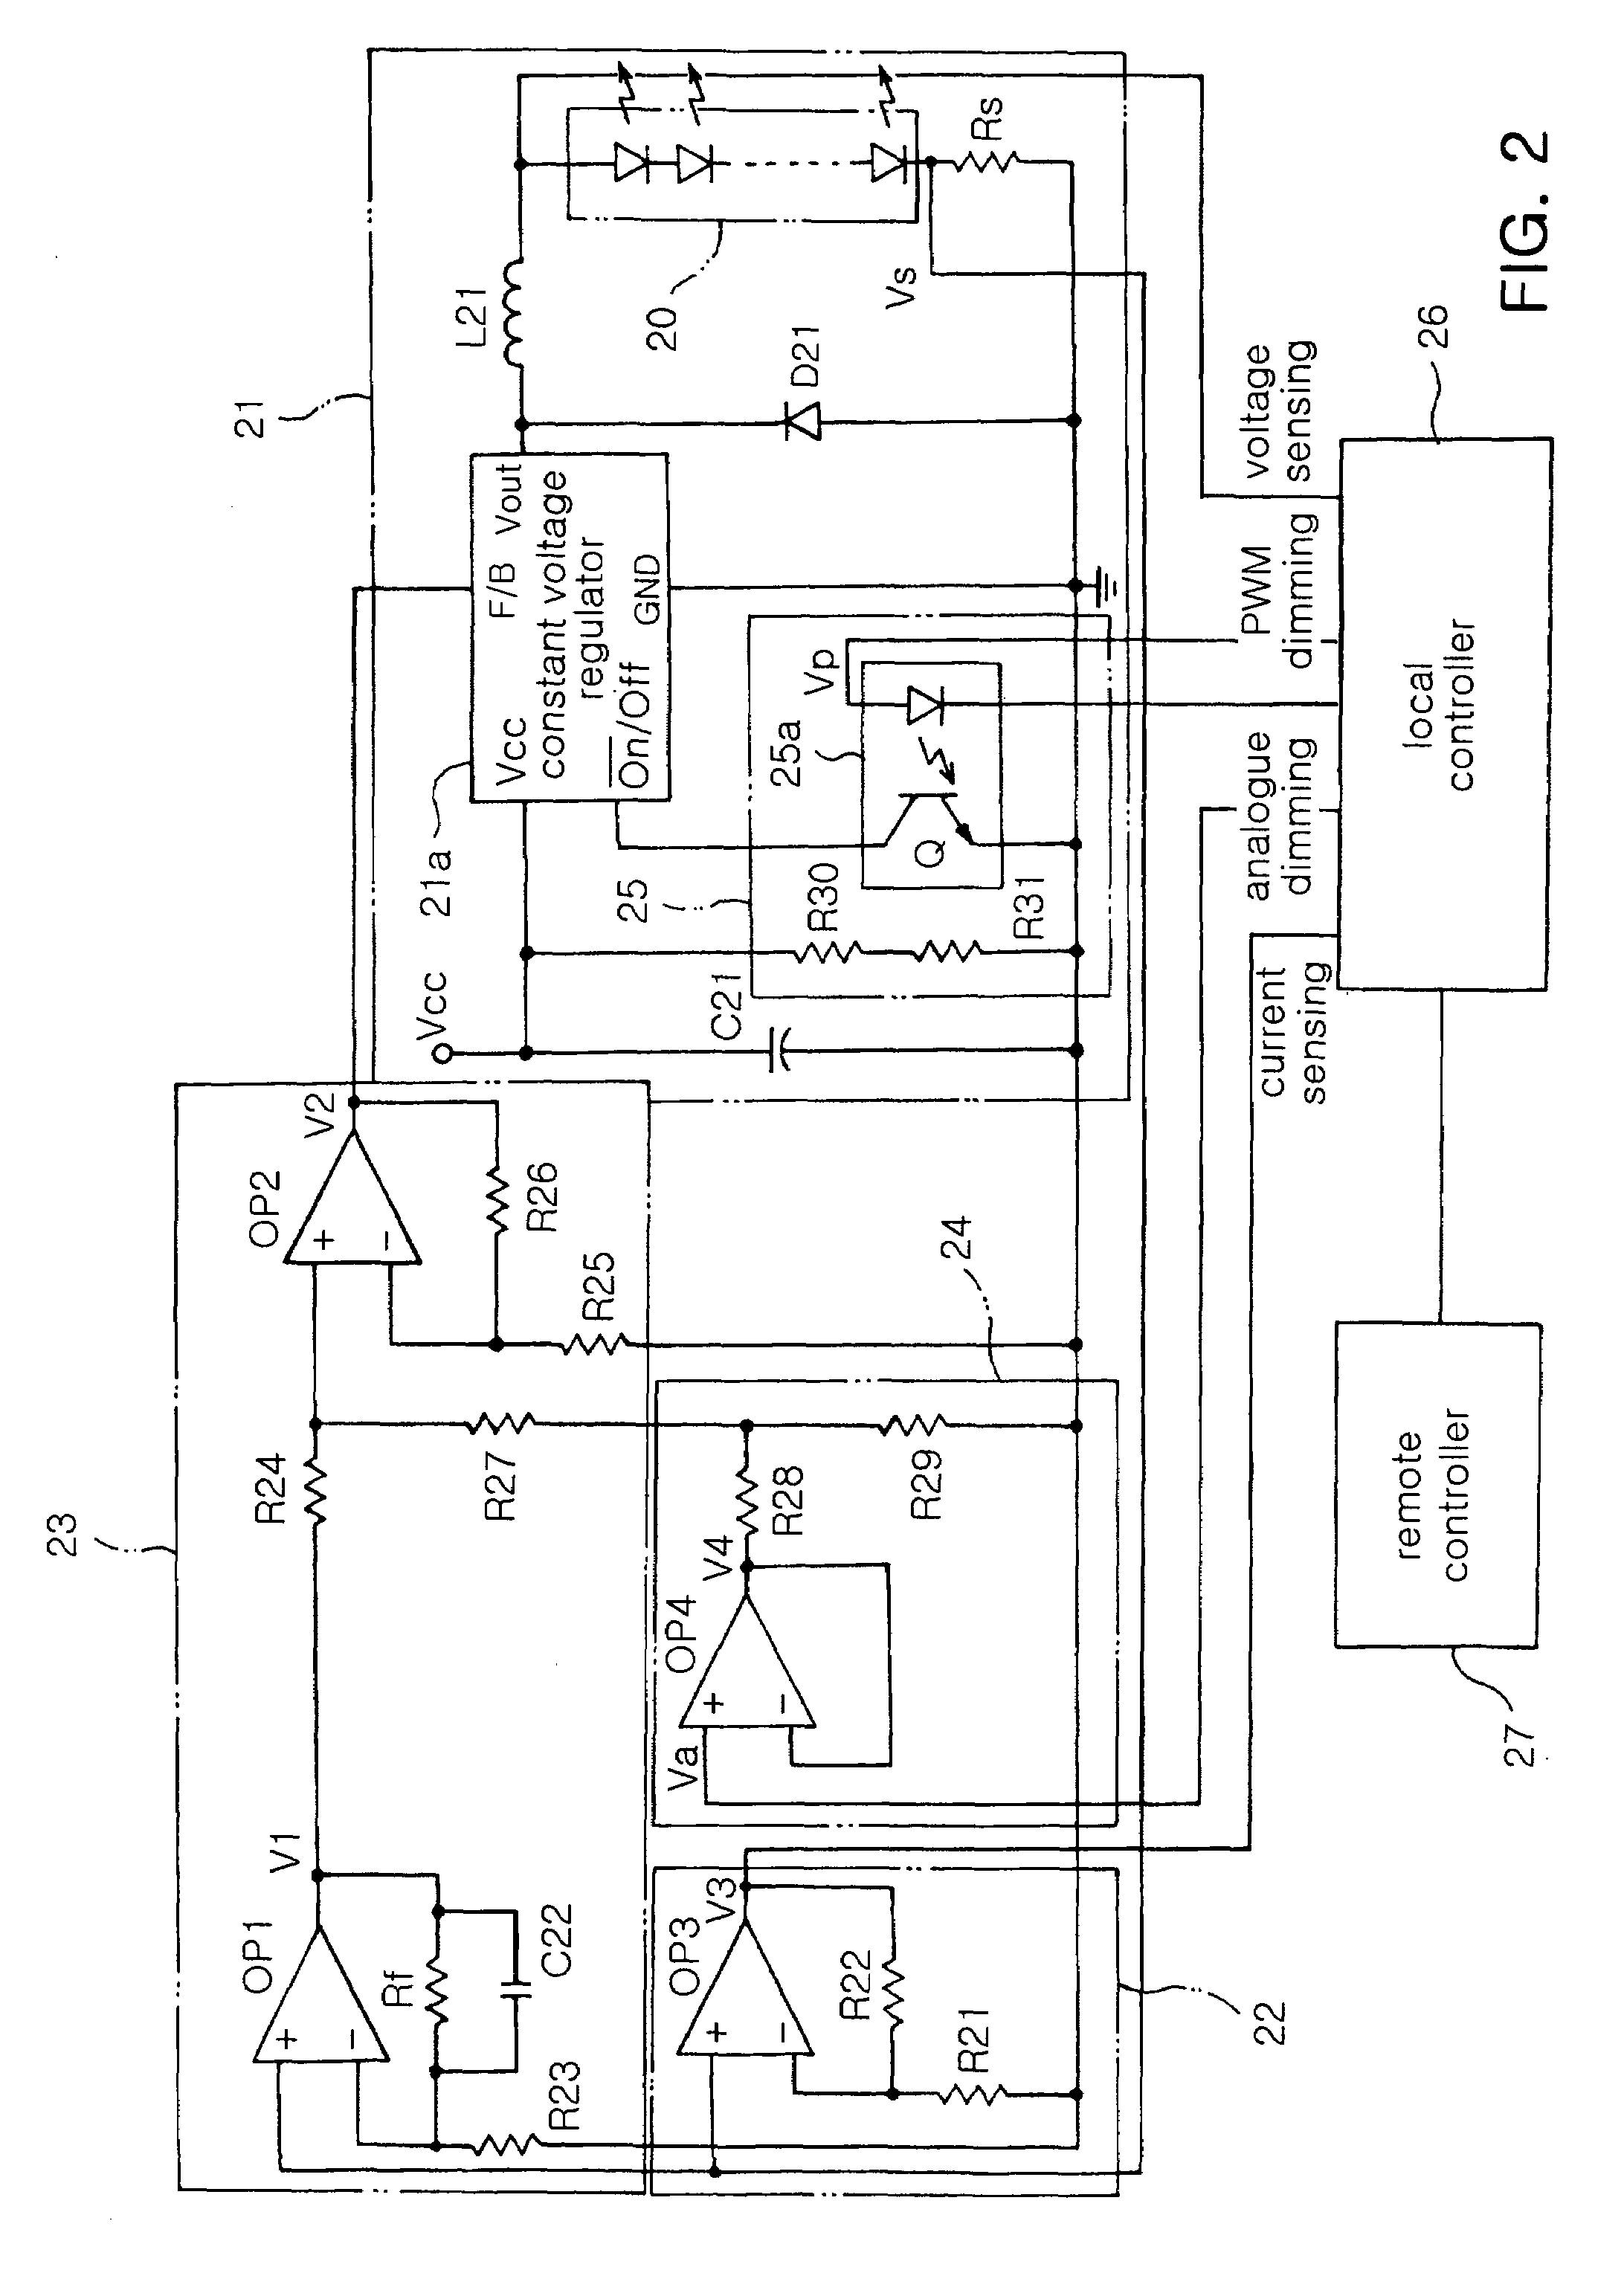 LED array driving apparatus and backlight driving apparatus using the same